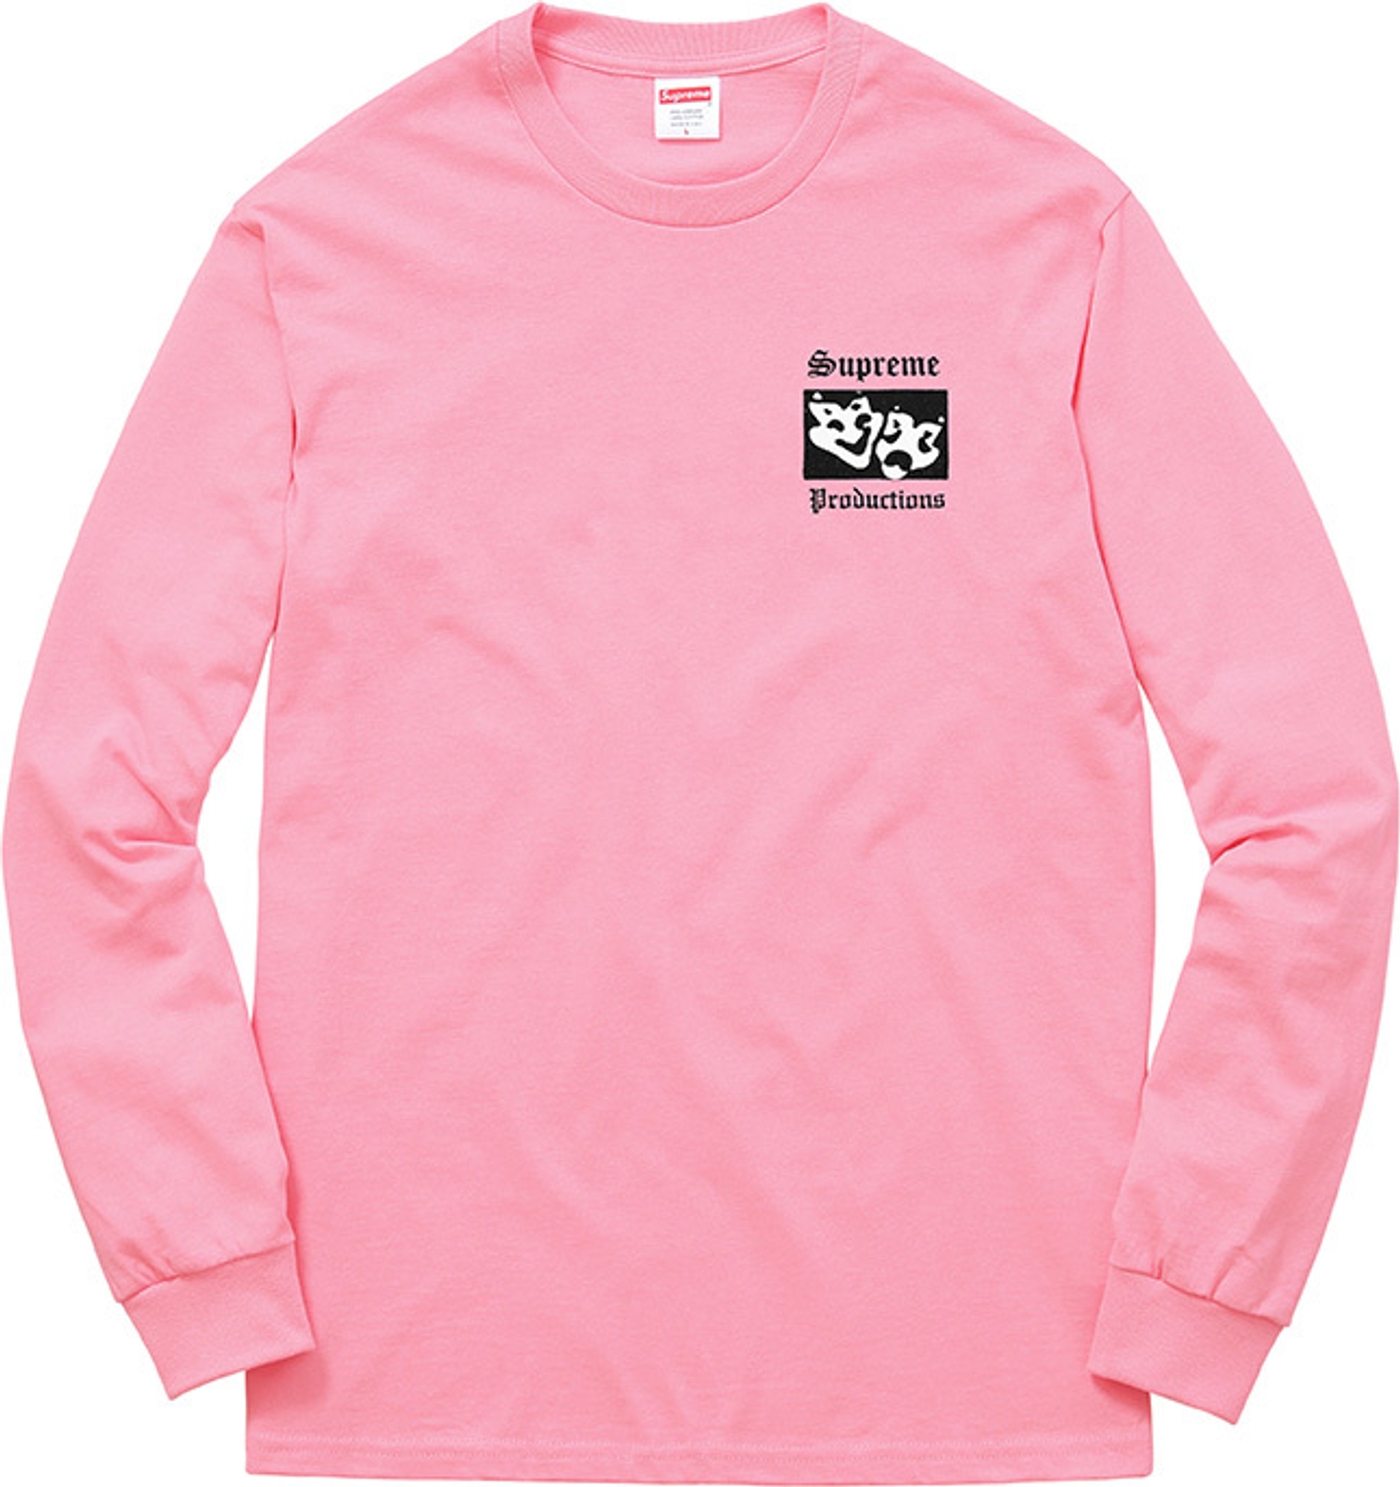 Productions L/S Tee (4/9)